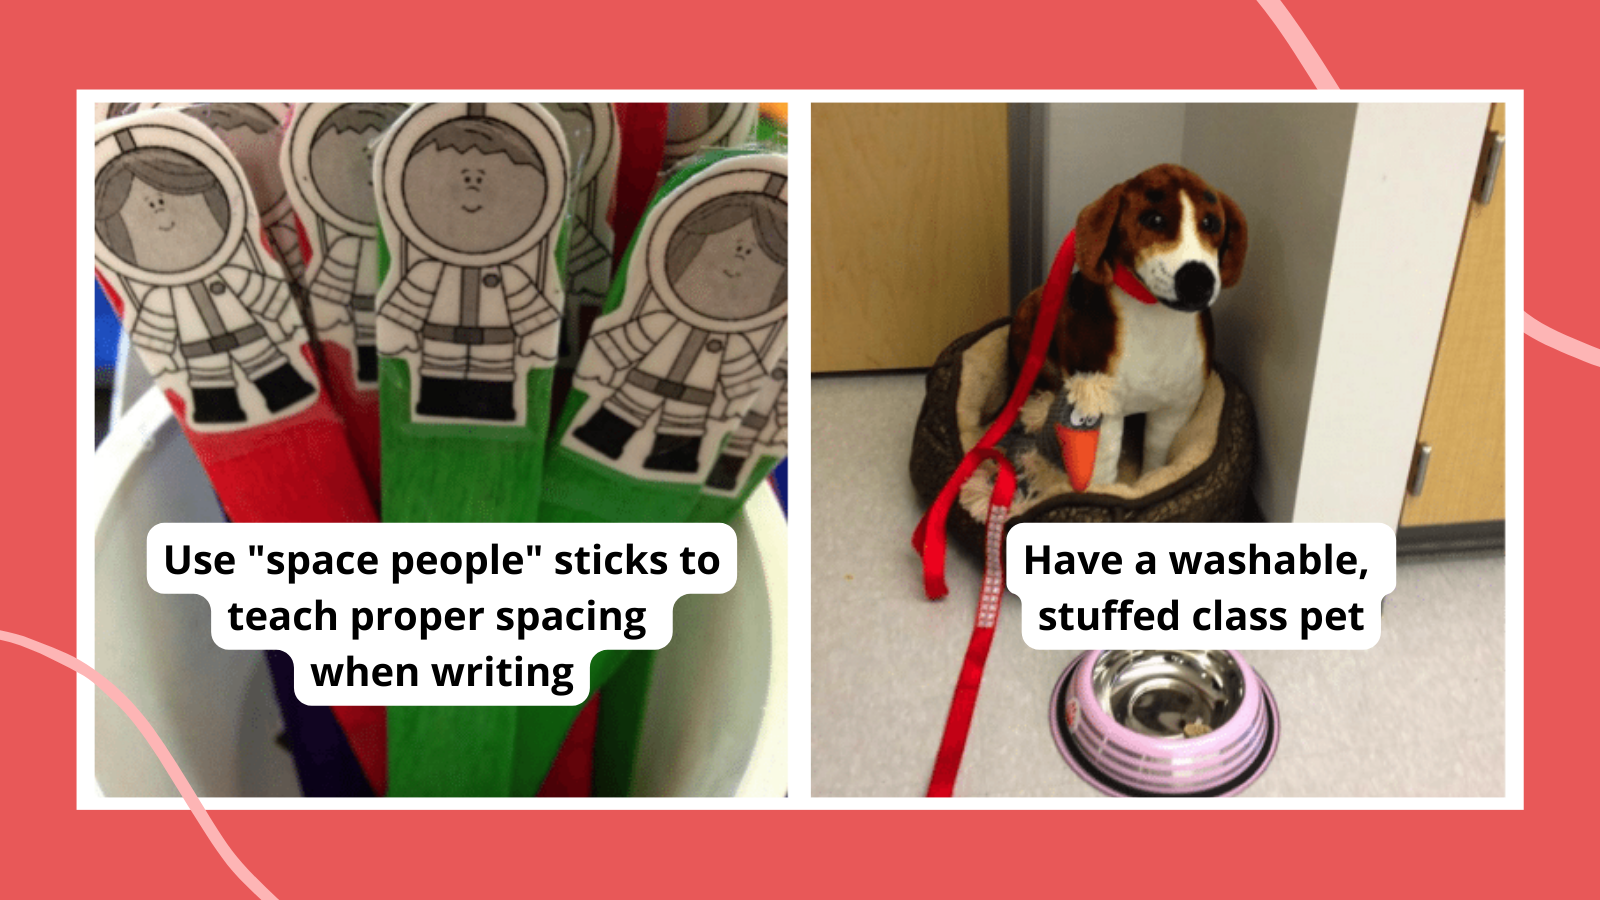 Tips, tricks, and ideas for teaching kindergarten such as using space people sticks to teach proper spacing when writing and having a washable, stuffed class pet.